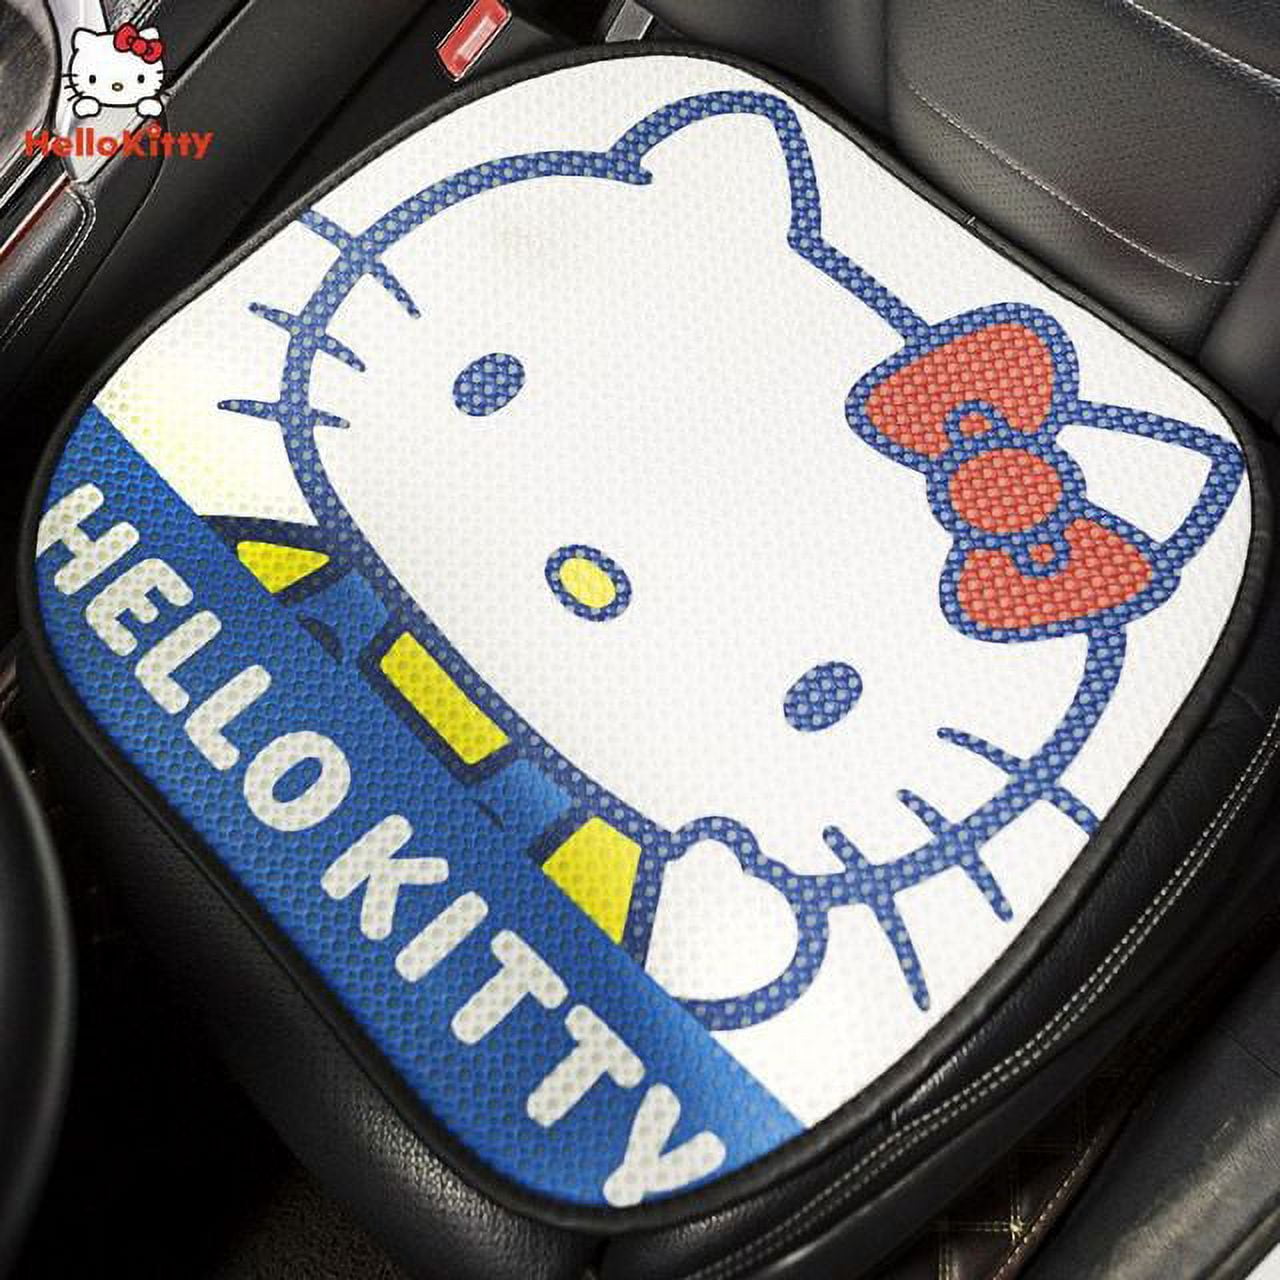 Hello Kitty Office Car Cushion Red Sanrio Inspired by You.